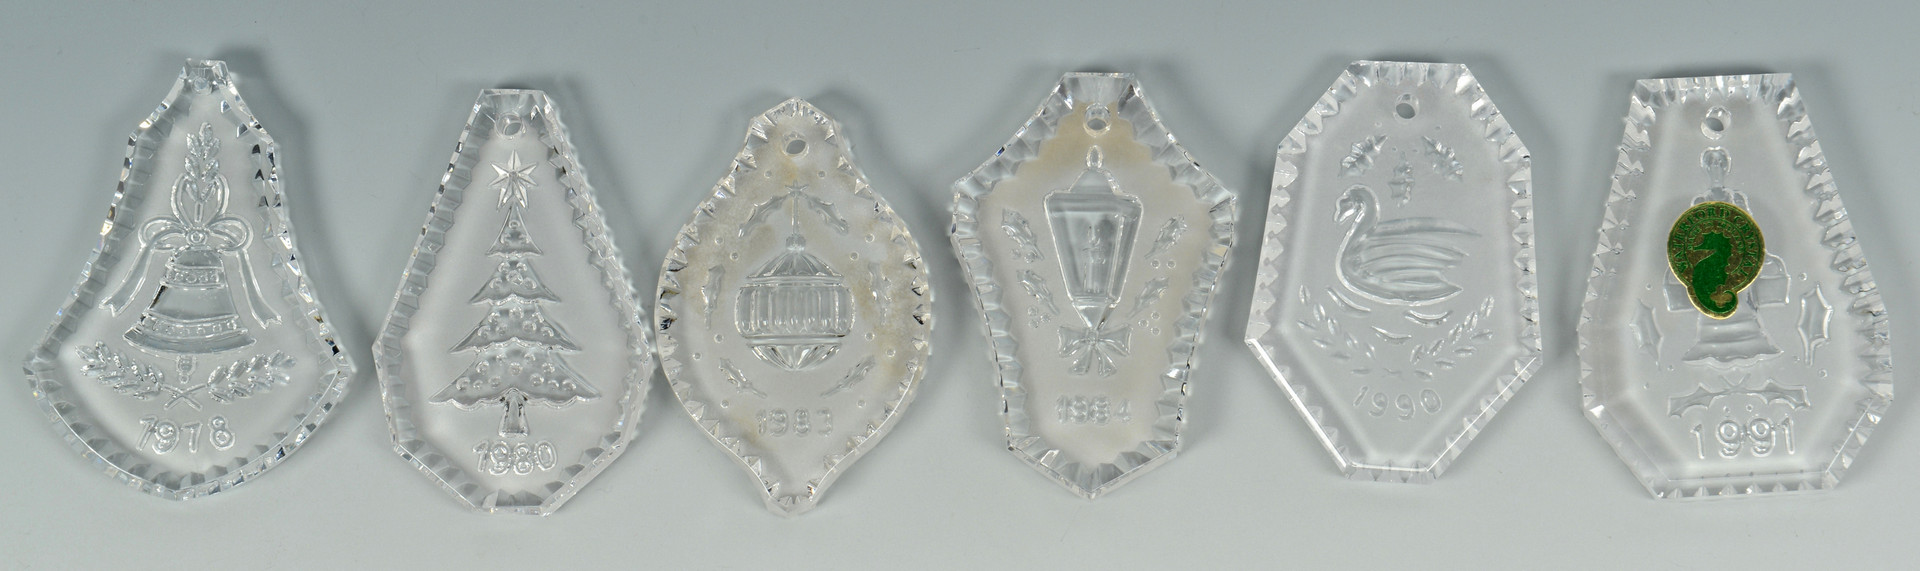 Lot 773: 17 Waterford Crystal Items